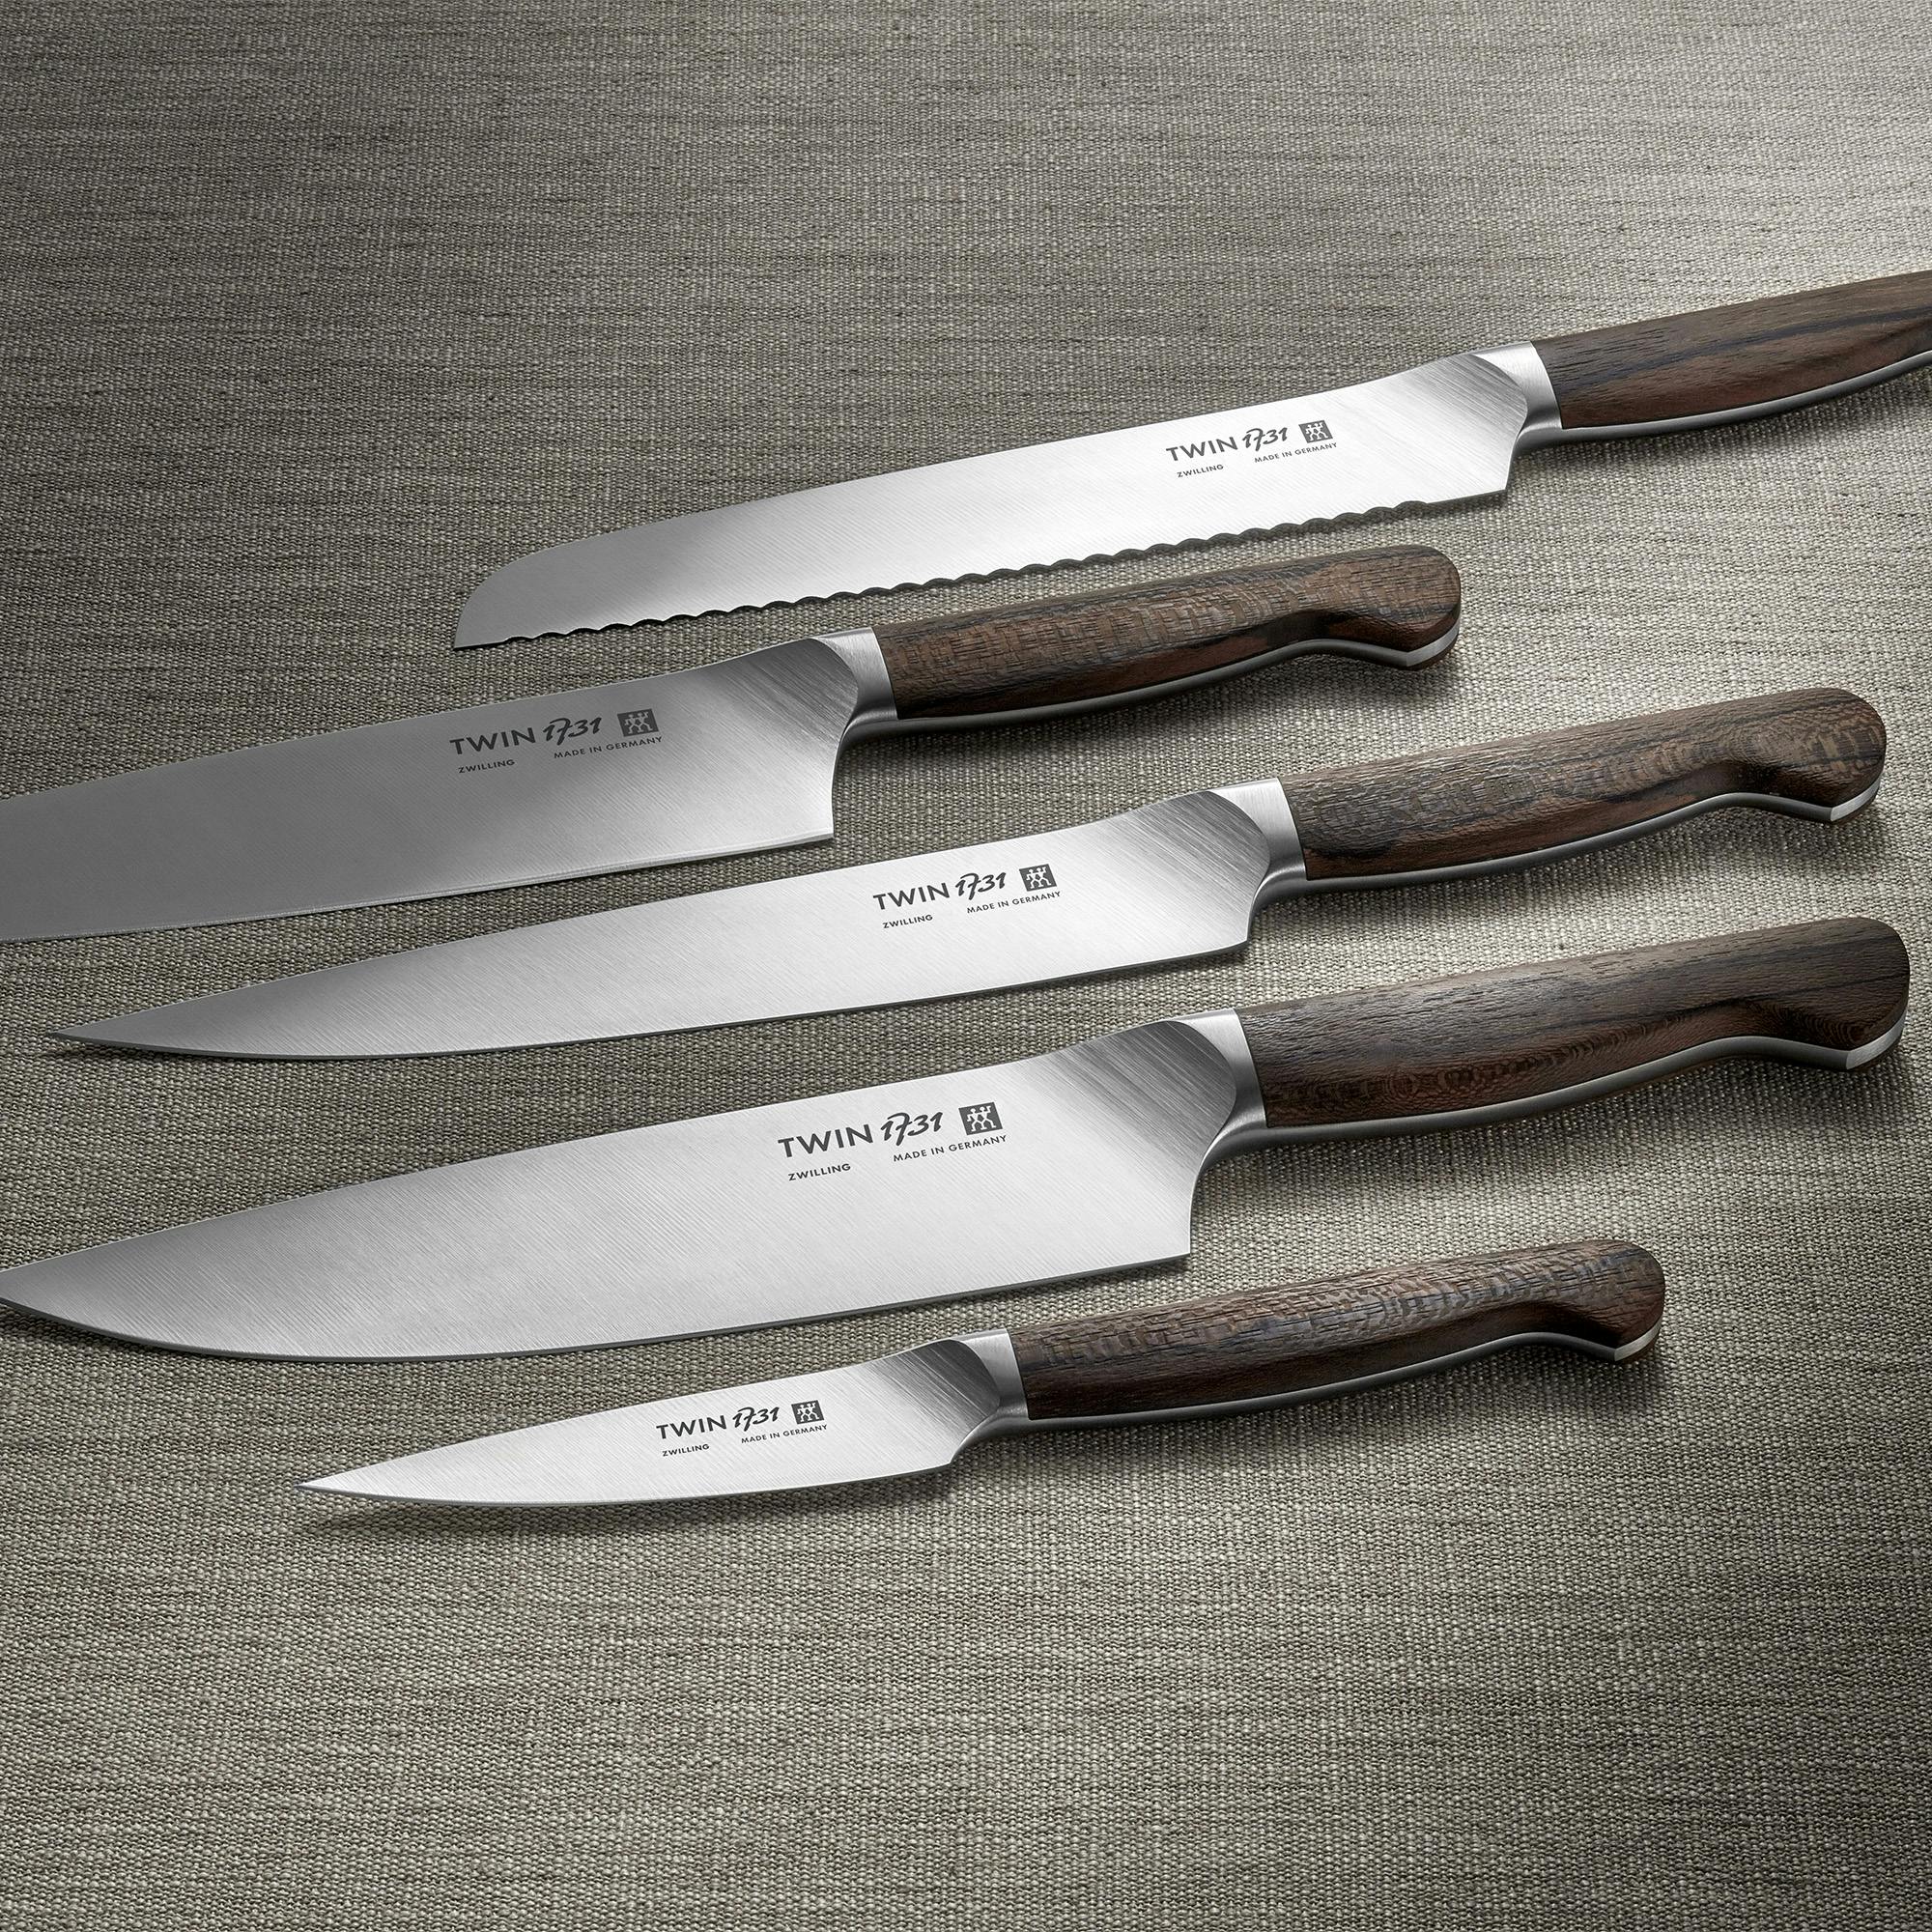 ZWILLING TWIN Signature 8-inch, Chef's knife